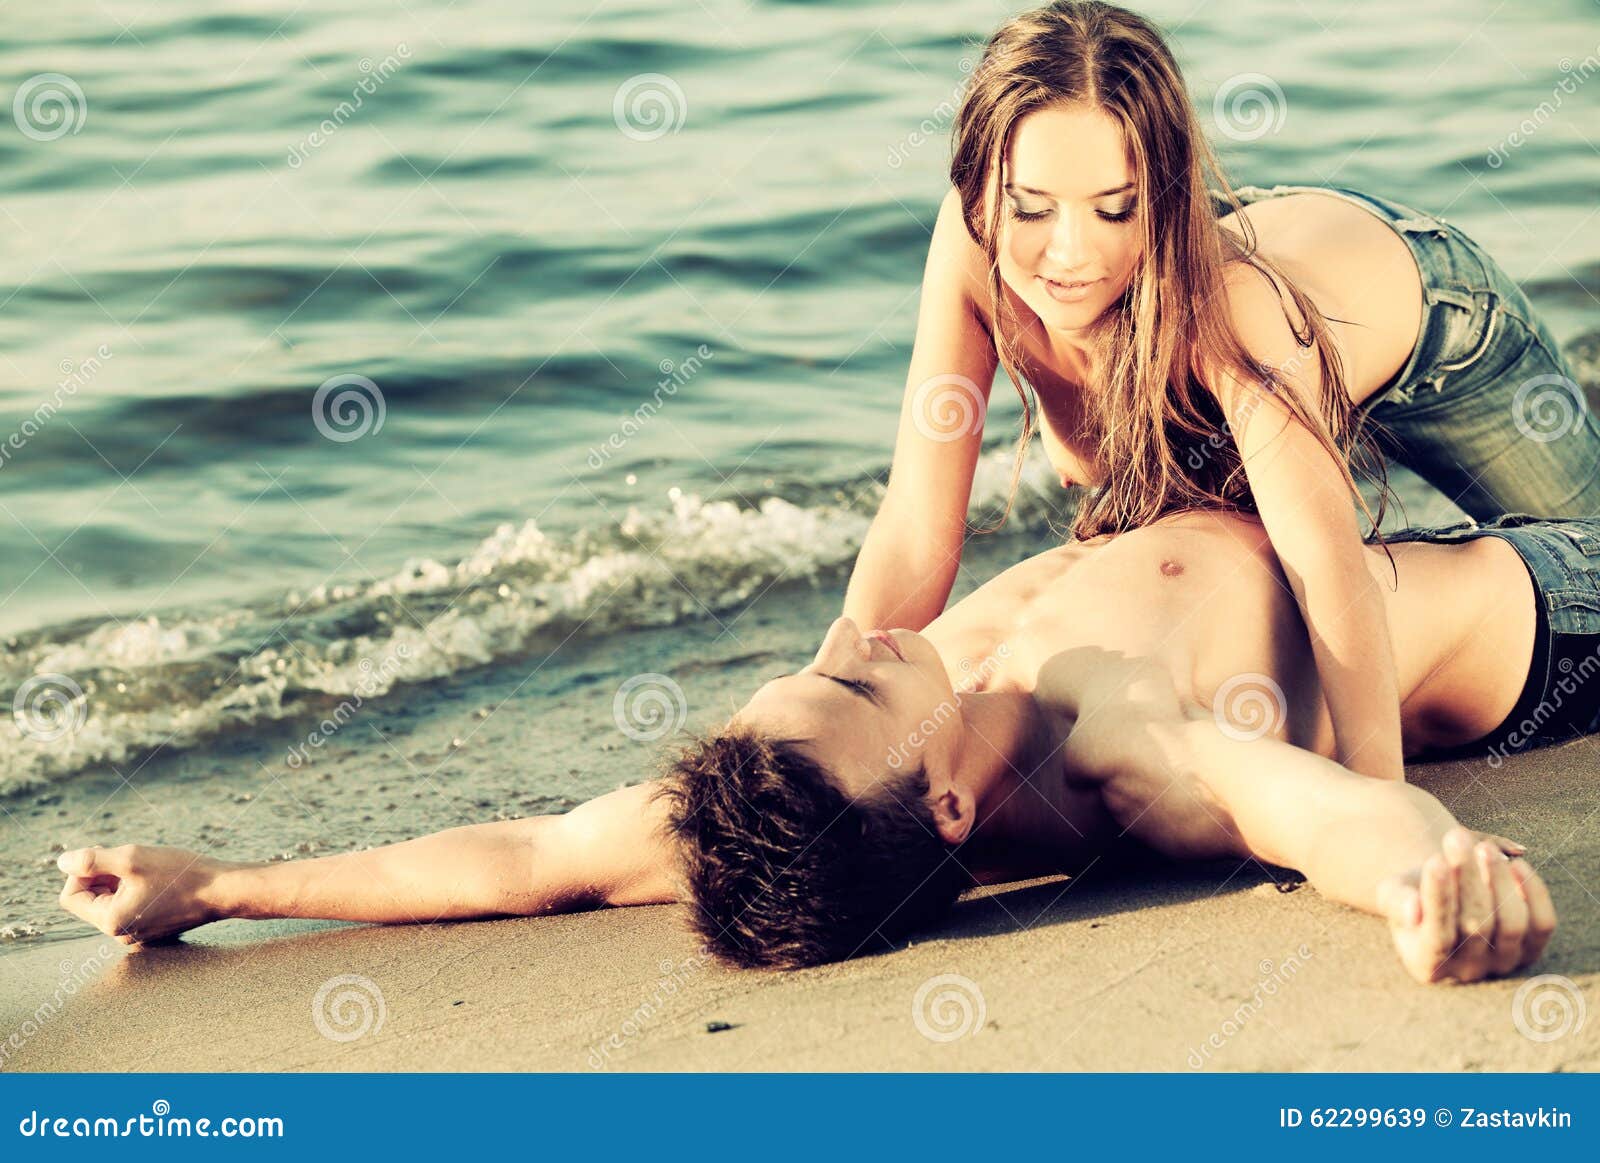 Couple at the beach stock image